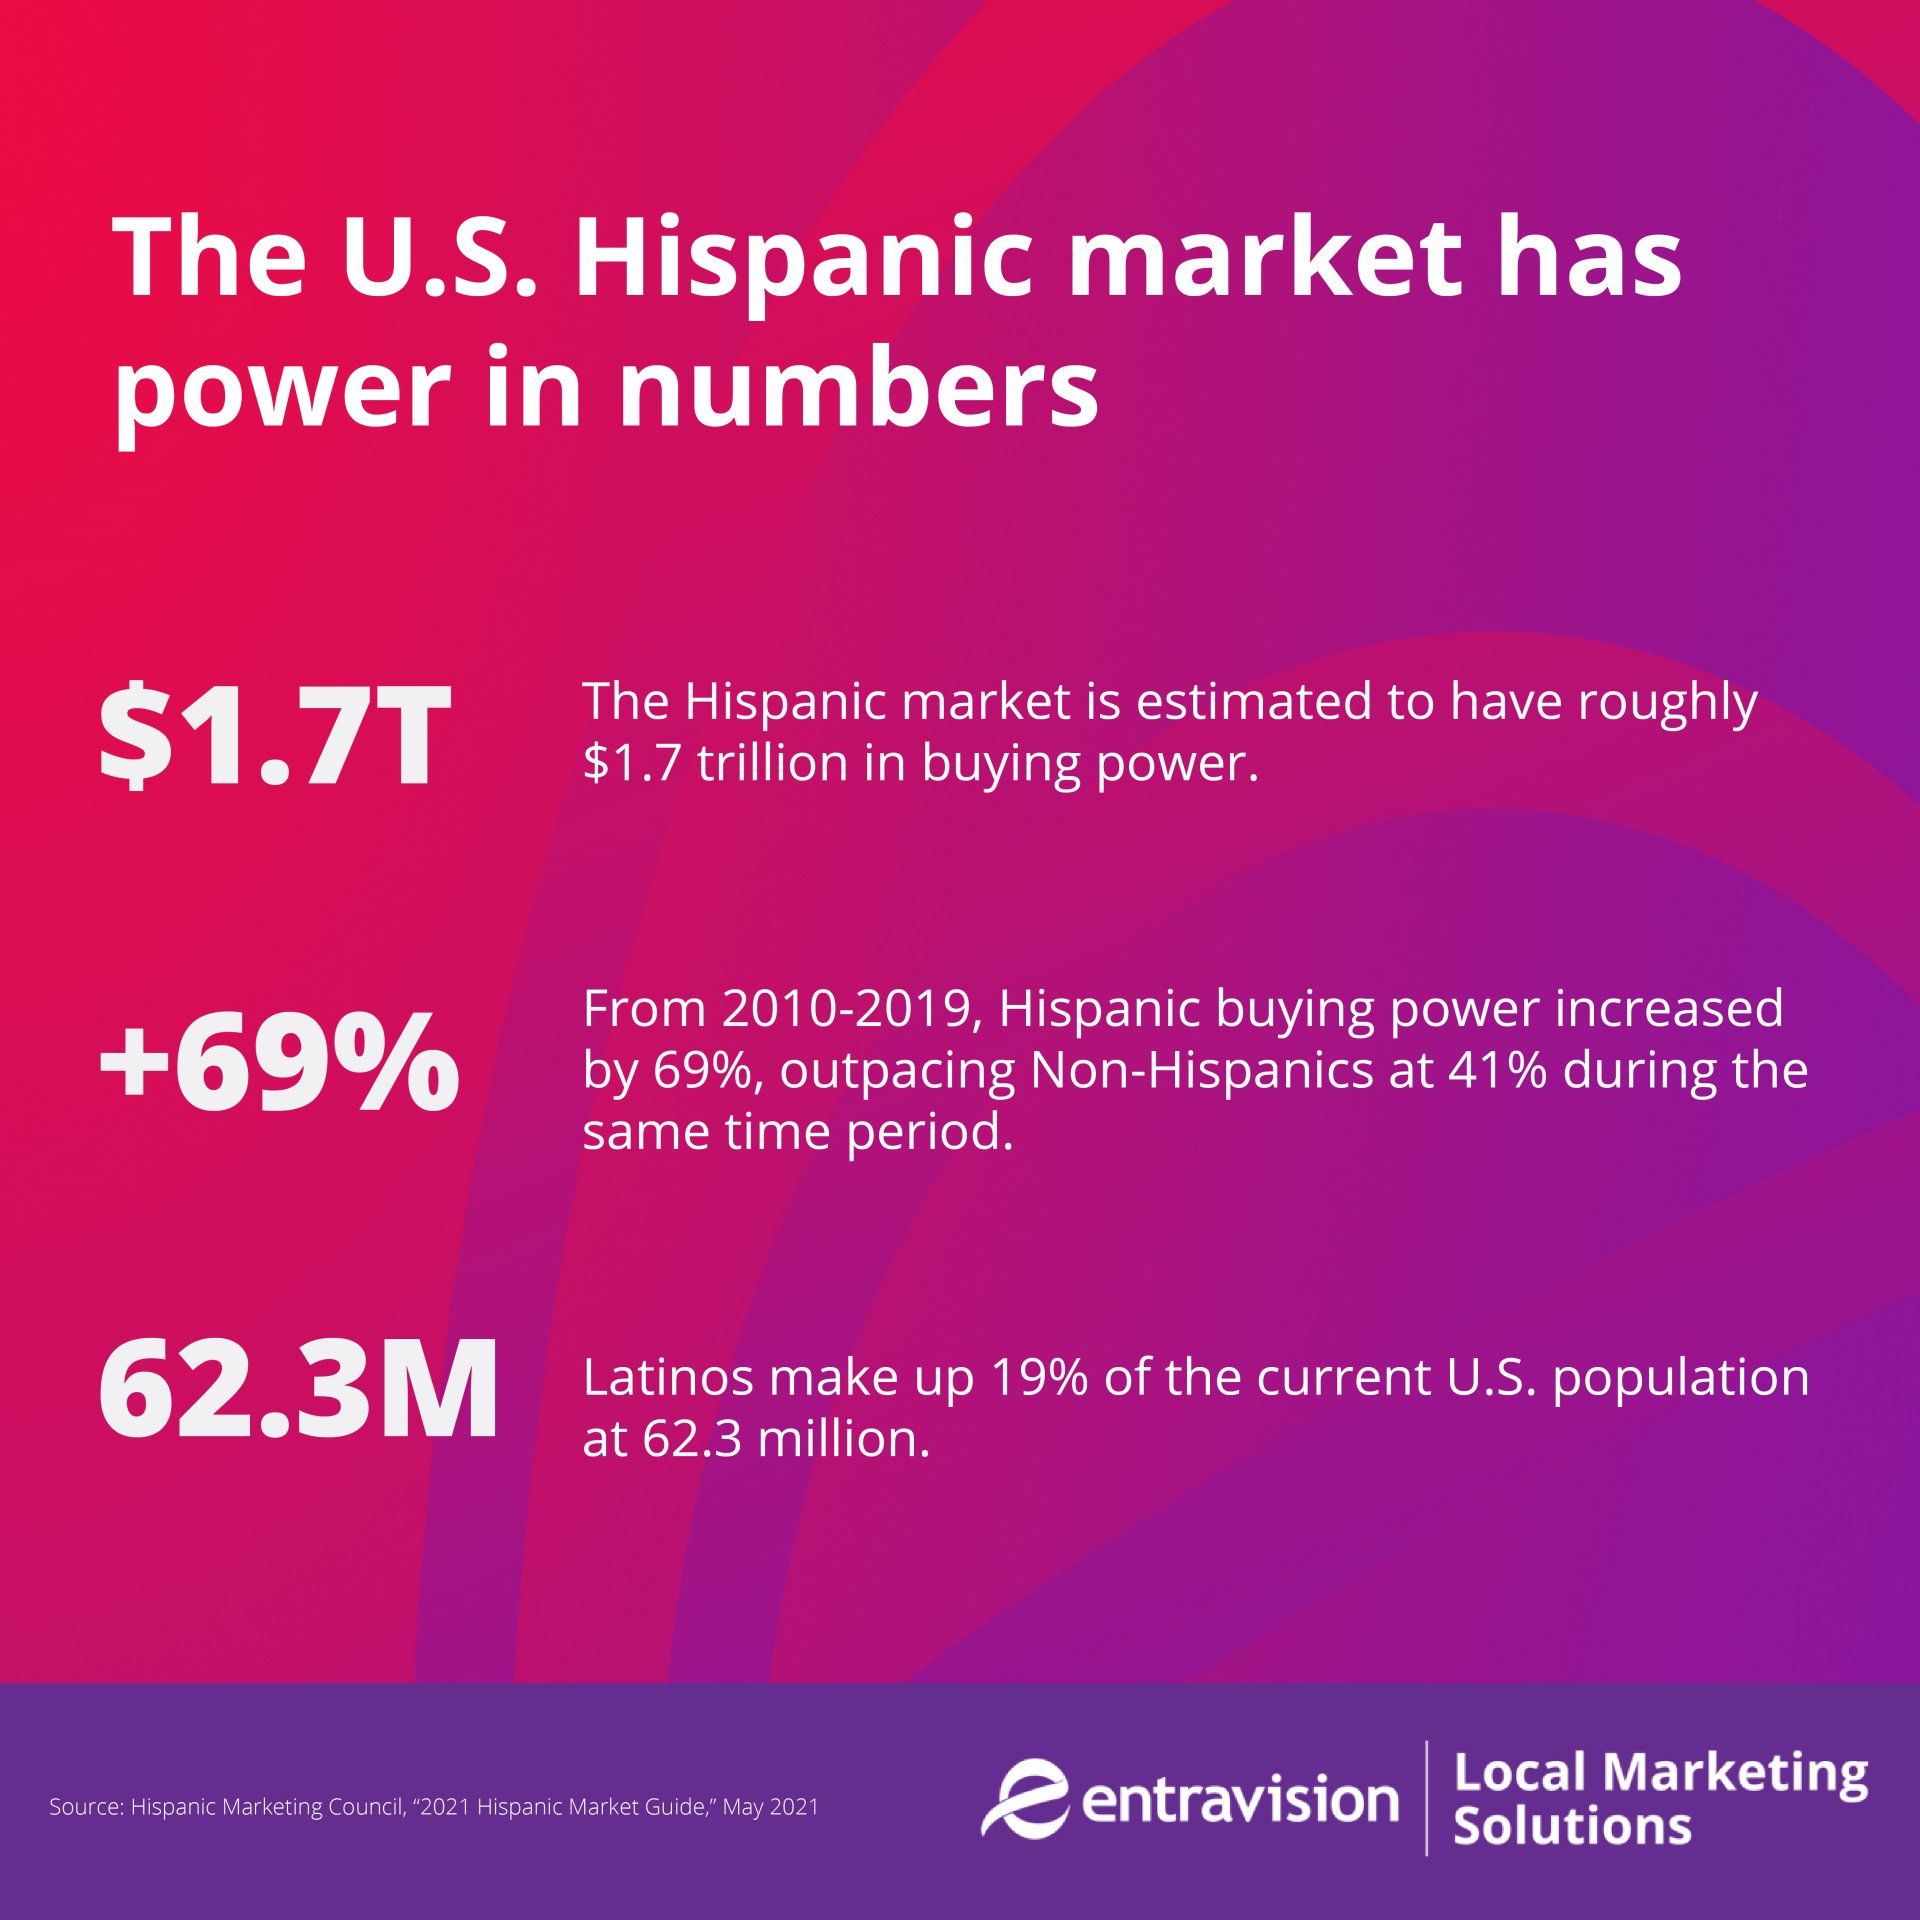 An infographic shows the power of the Hispanic market and why businesses should focus on reaching Hispanic consumers via Hispanic marketing.